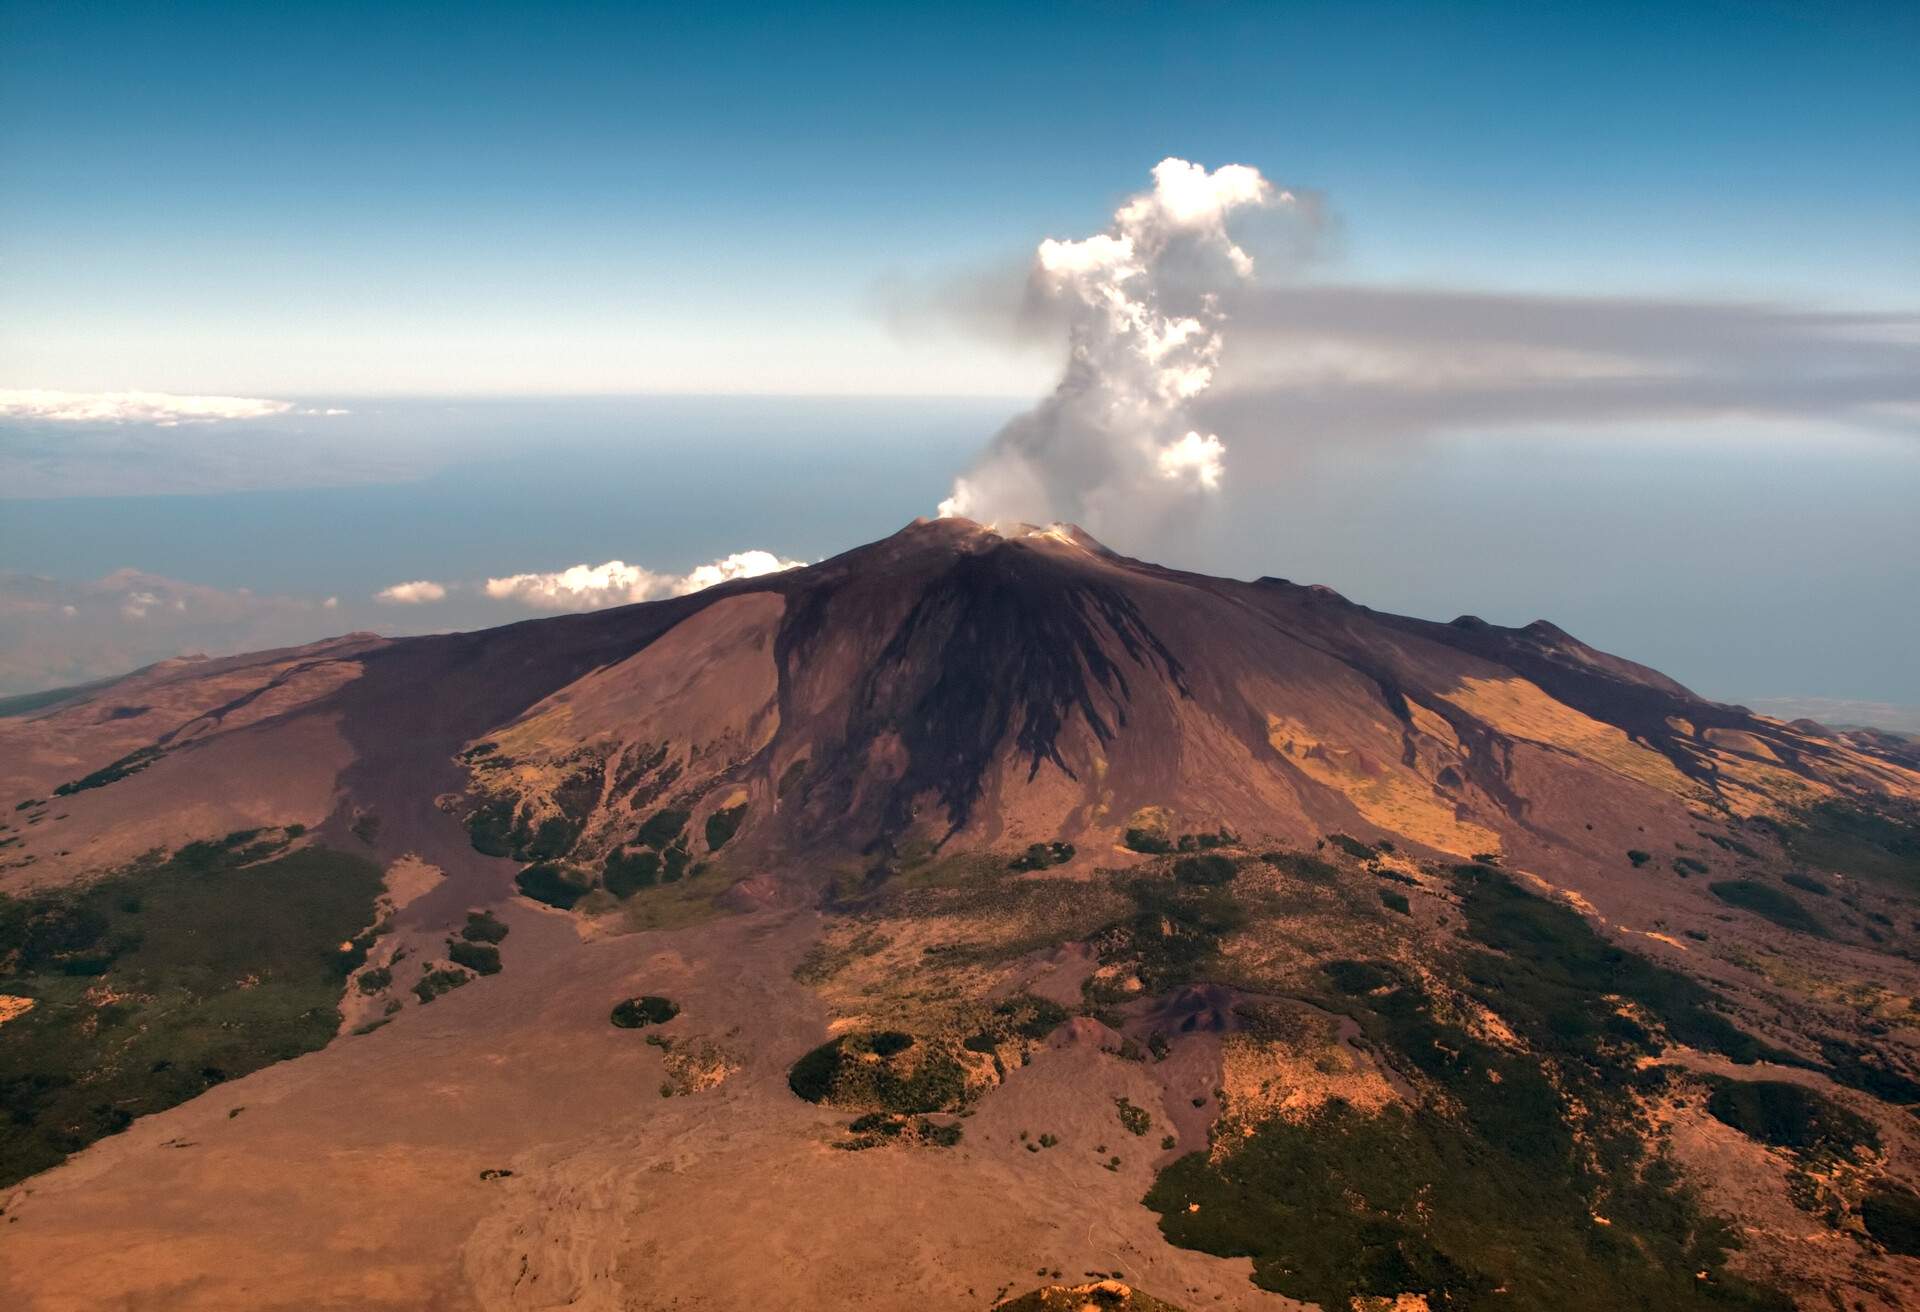 Aerial view of volcanic activity on top of Mount Etna, largest and most active volcano in Europe, with central crater spewing ash and smoke on  clear blue sky.